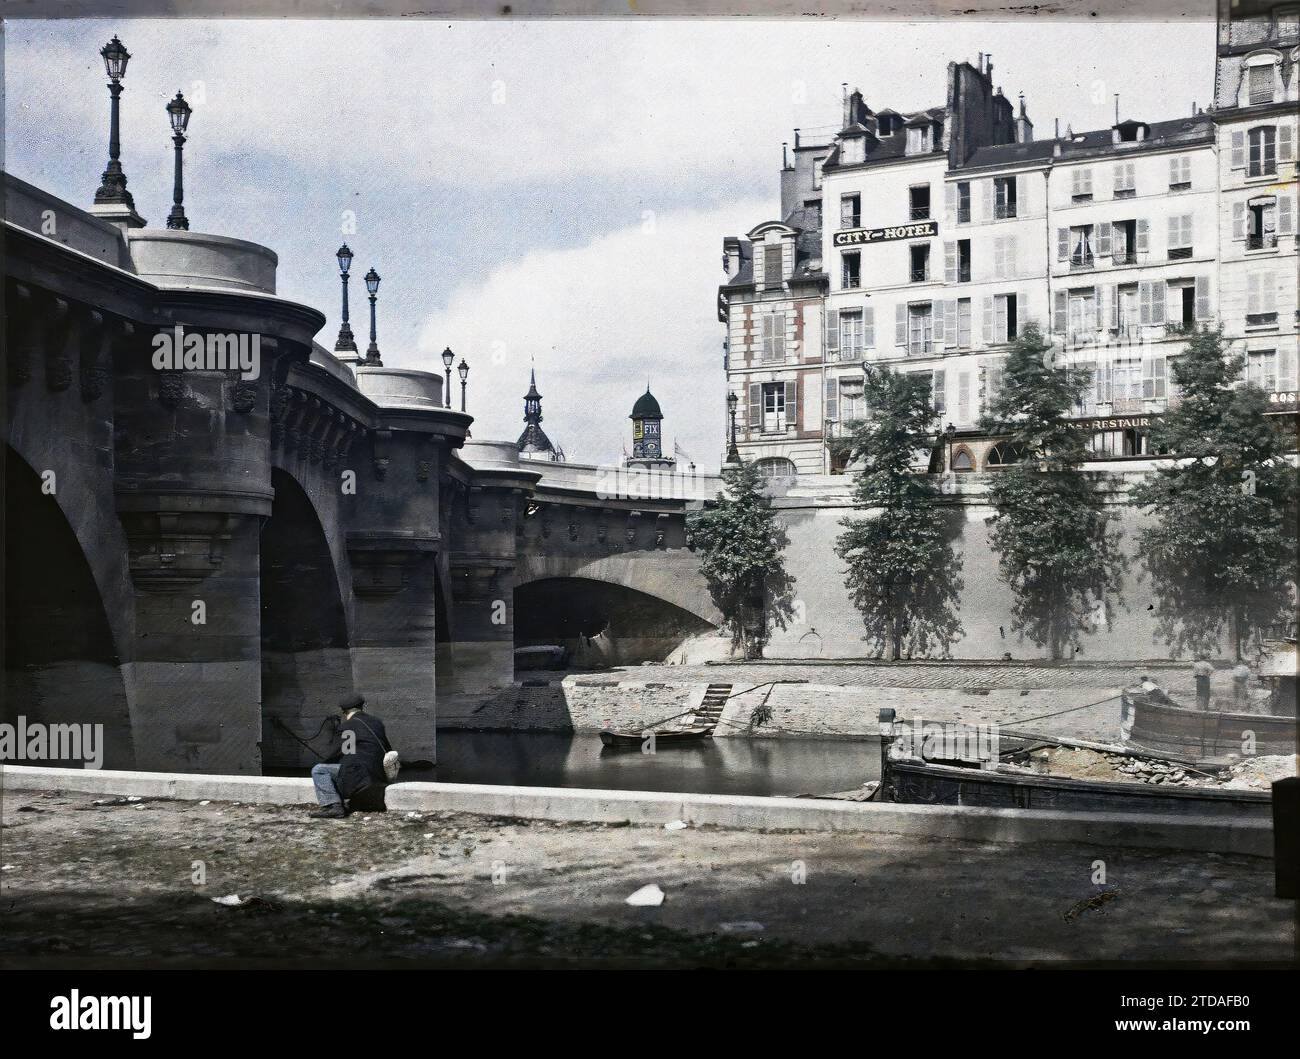 Paris (1st arr.), France The Pont-Neuf and the Quai des Orfèvres, seen from the port of Grands Augustins, Housing, Architecture, Inscription, information, Economic activity, Transport, Human beings, Street lamp, street lamp, River, Civil engineering, Quay, Boat, Commercial inscription, Morris Column, Catering, hotels, River and lake transport, Bridge, Man, Pont Neuf and quai des Orfèvres 16/7 14 France, Paris, Pont neuf and quai des Orfèvres, Île de la Cité, 16/07/1914 - 16/07/1914, Passet, Stéphane, photographer, Autochrome, photo, Glass, Autochrome, photo, Positive, Horizontal, Size 9 x 12 c Stock Photo